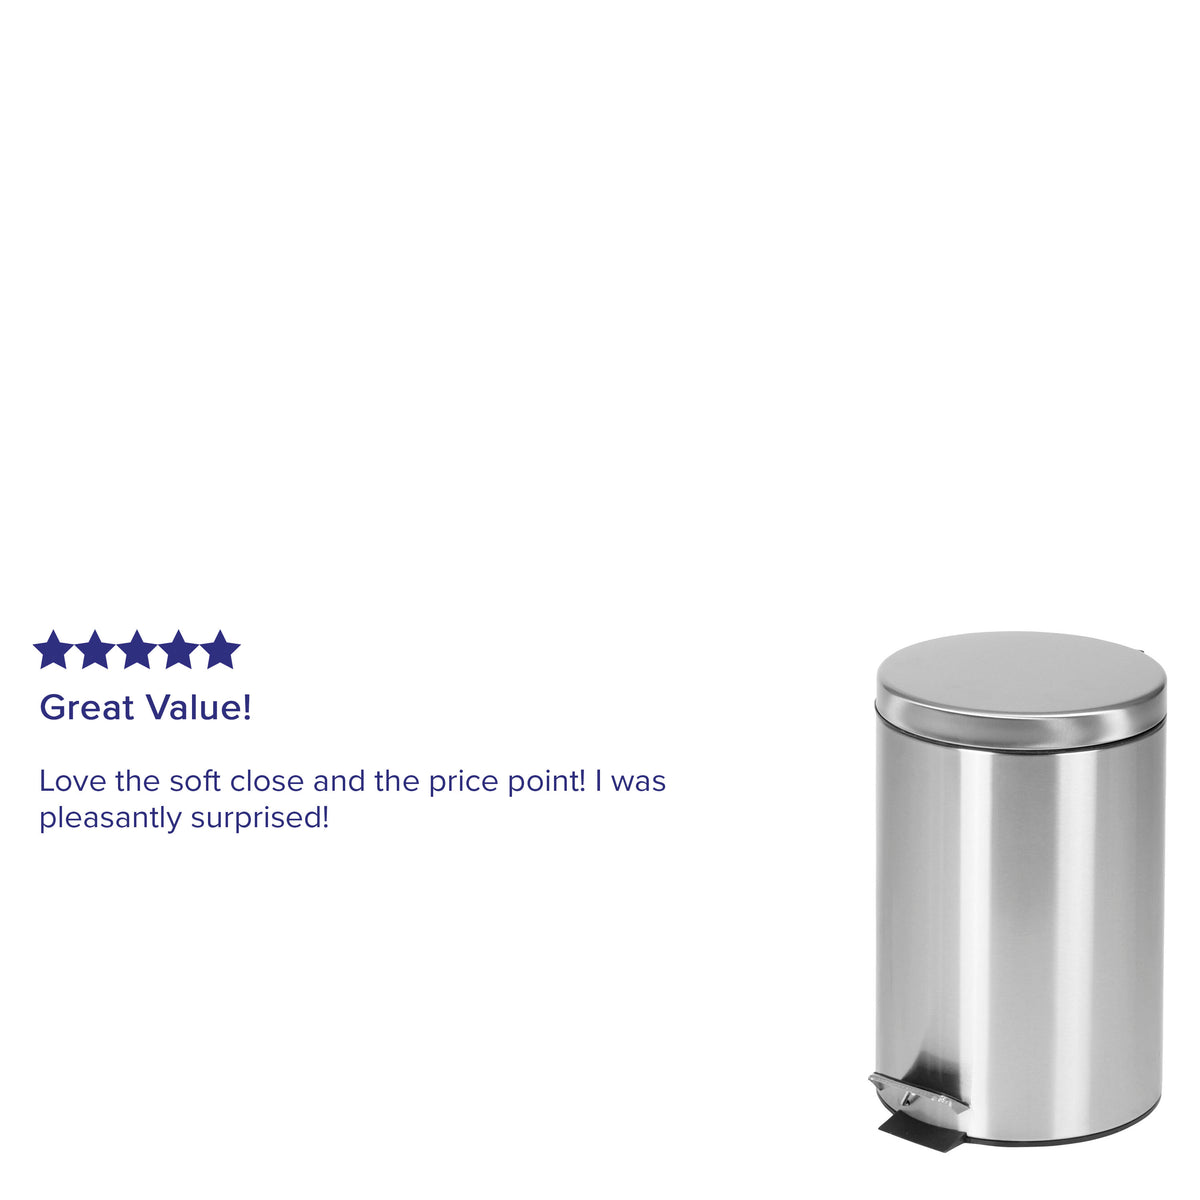 12L (3.2 Gallons) |#| Stainless Steel Imprint Resistant Soft Close, Step Trash Can - 3.2 Gallons (12L)